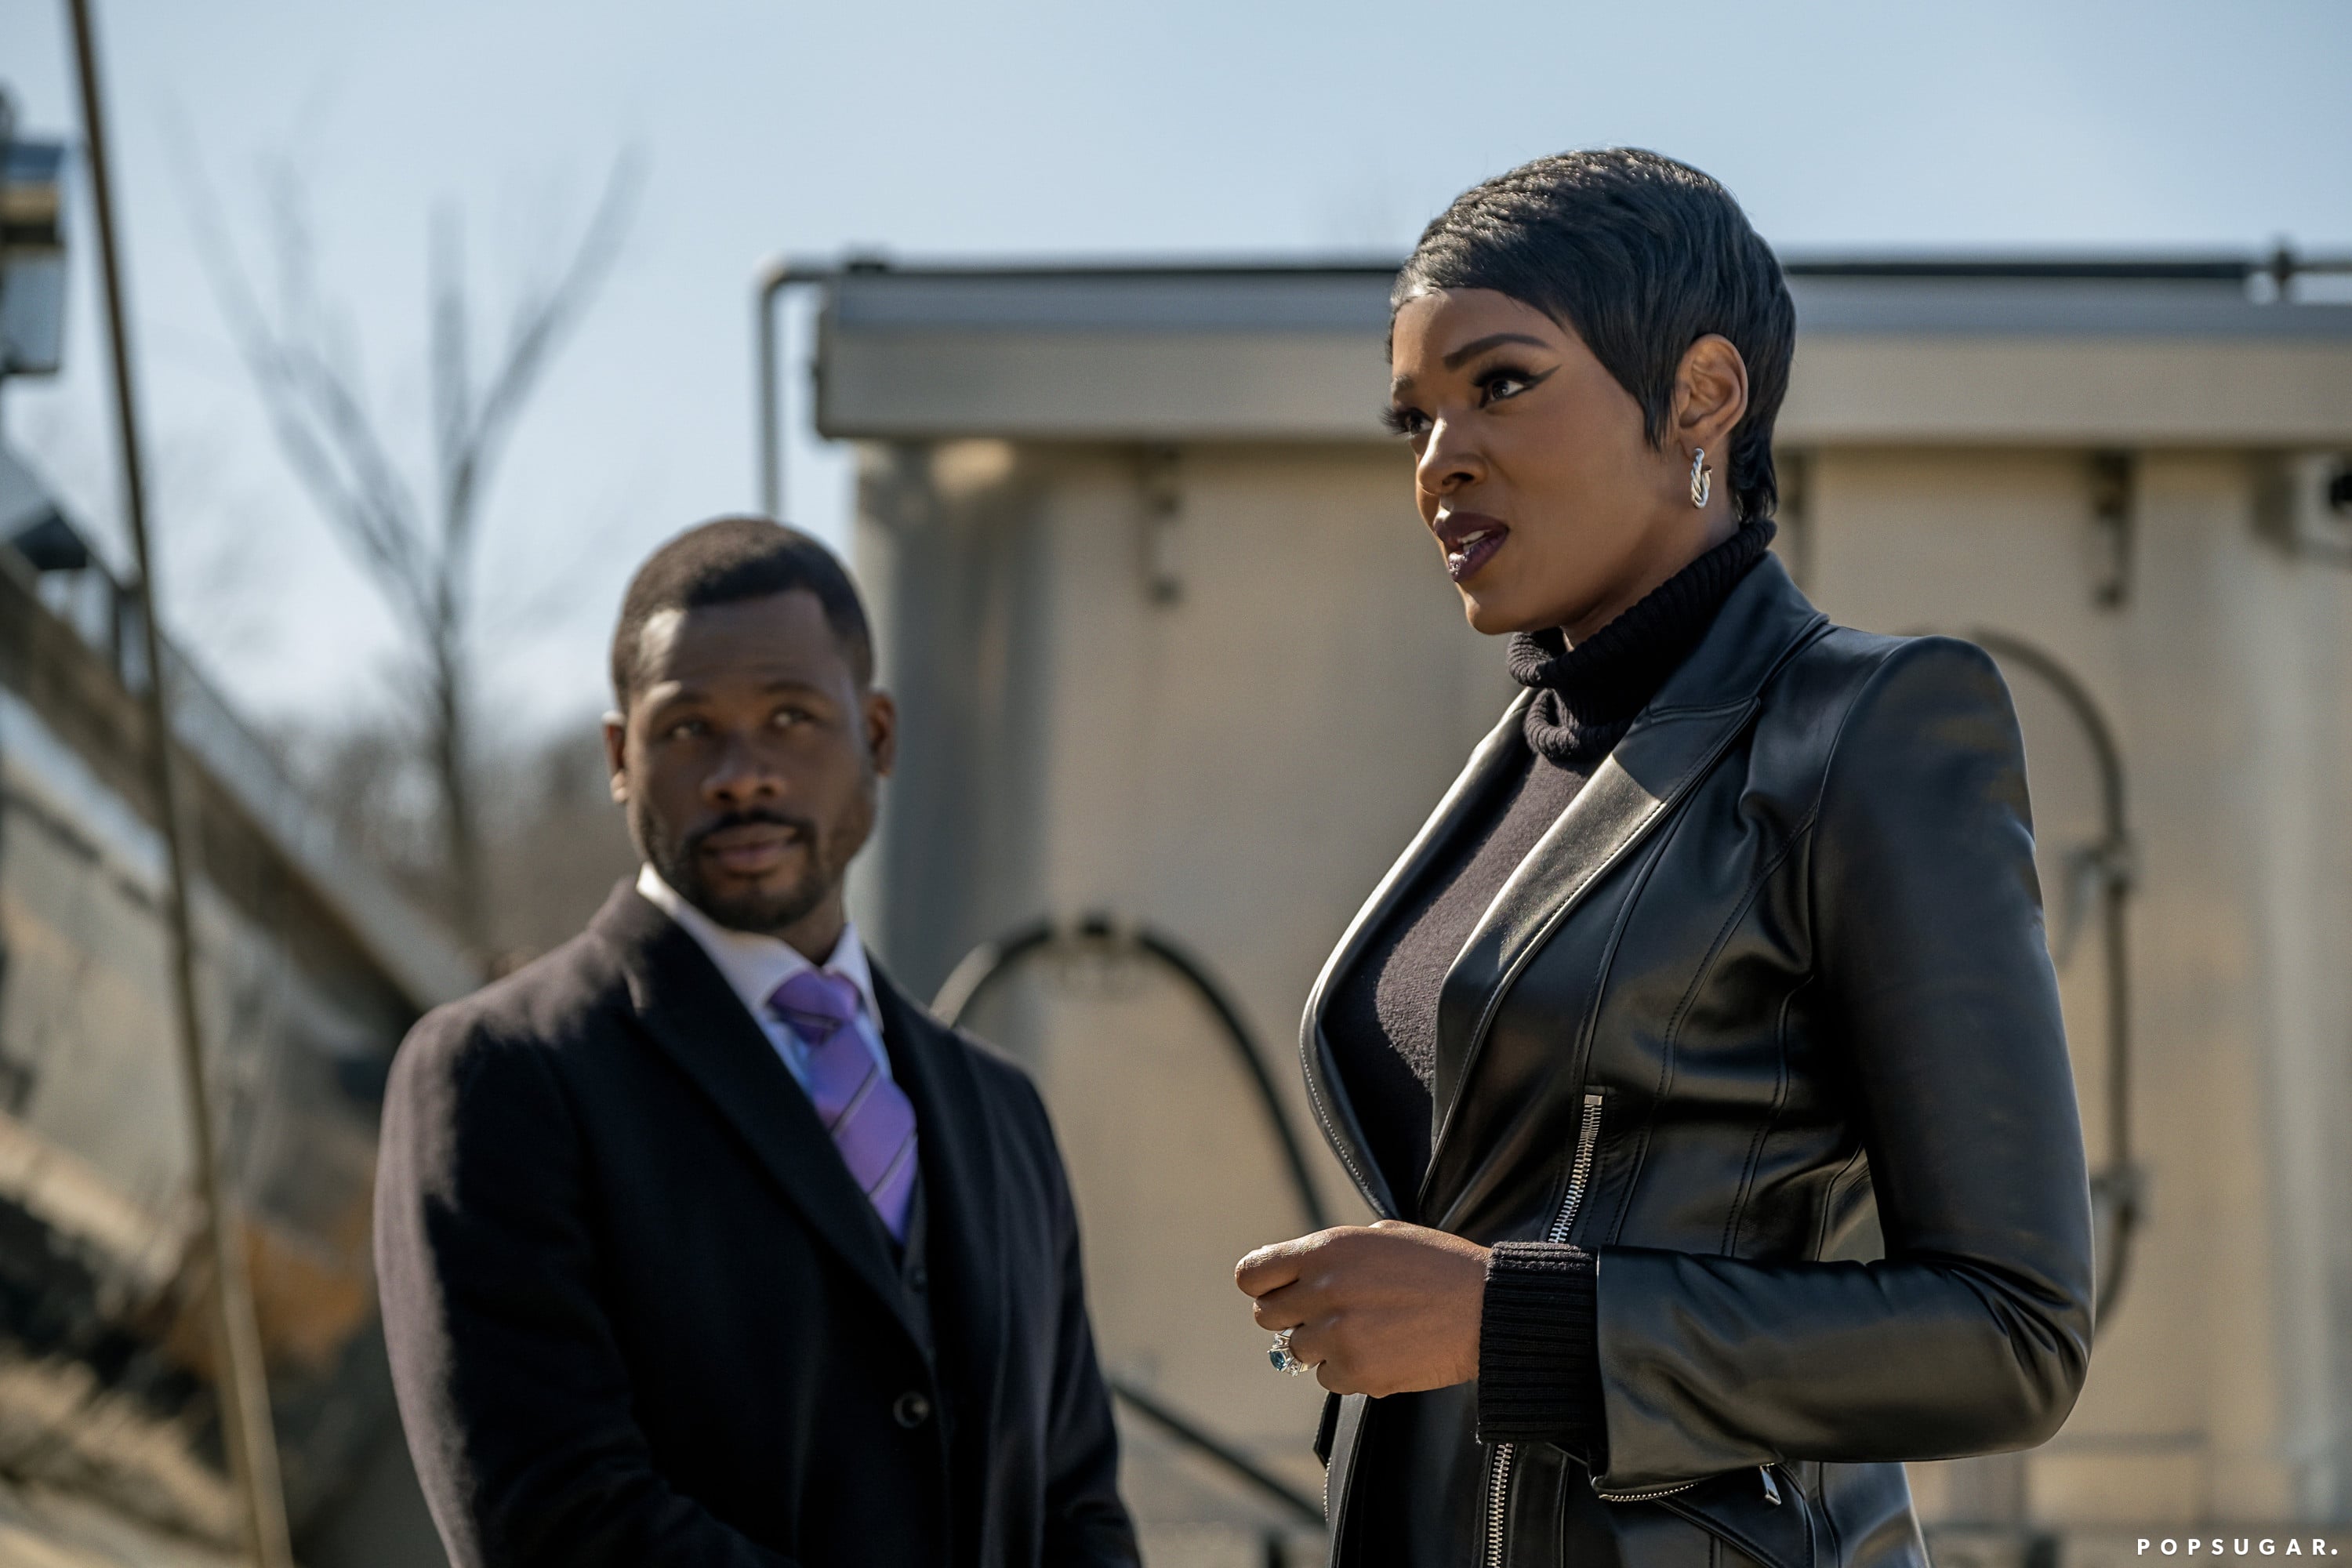 Power Book II: Ghost' Episode Guide: What to Know for Season 3